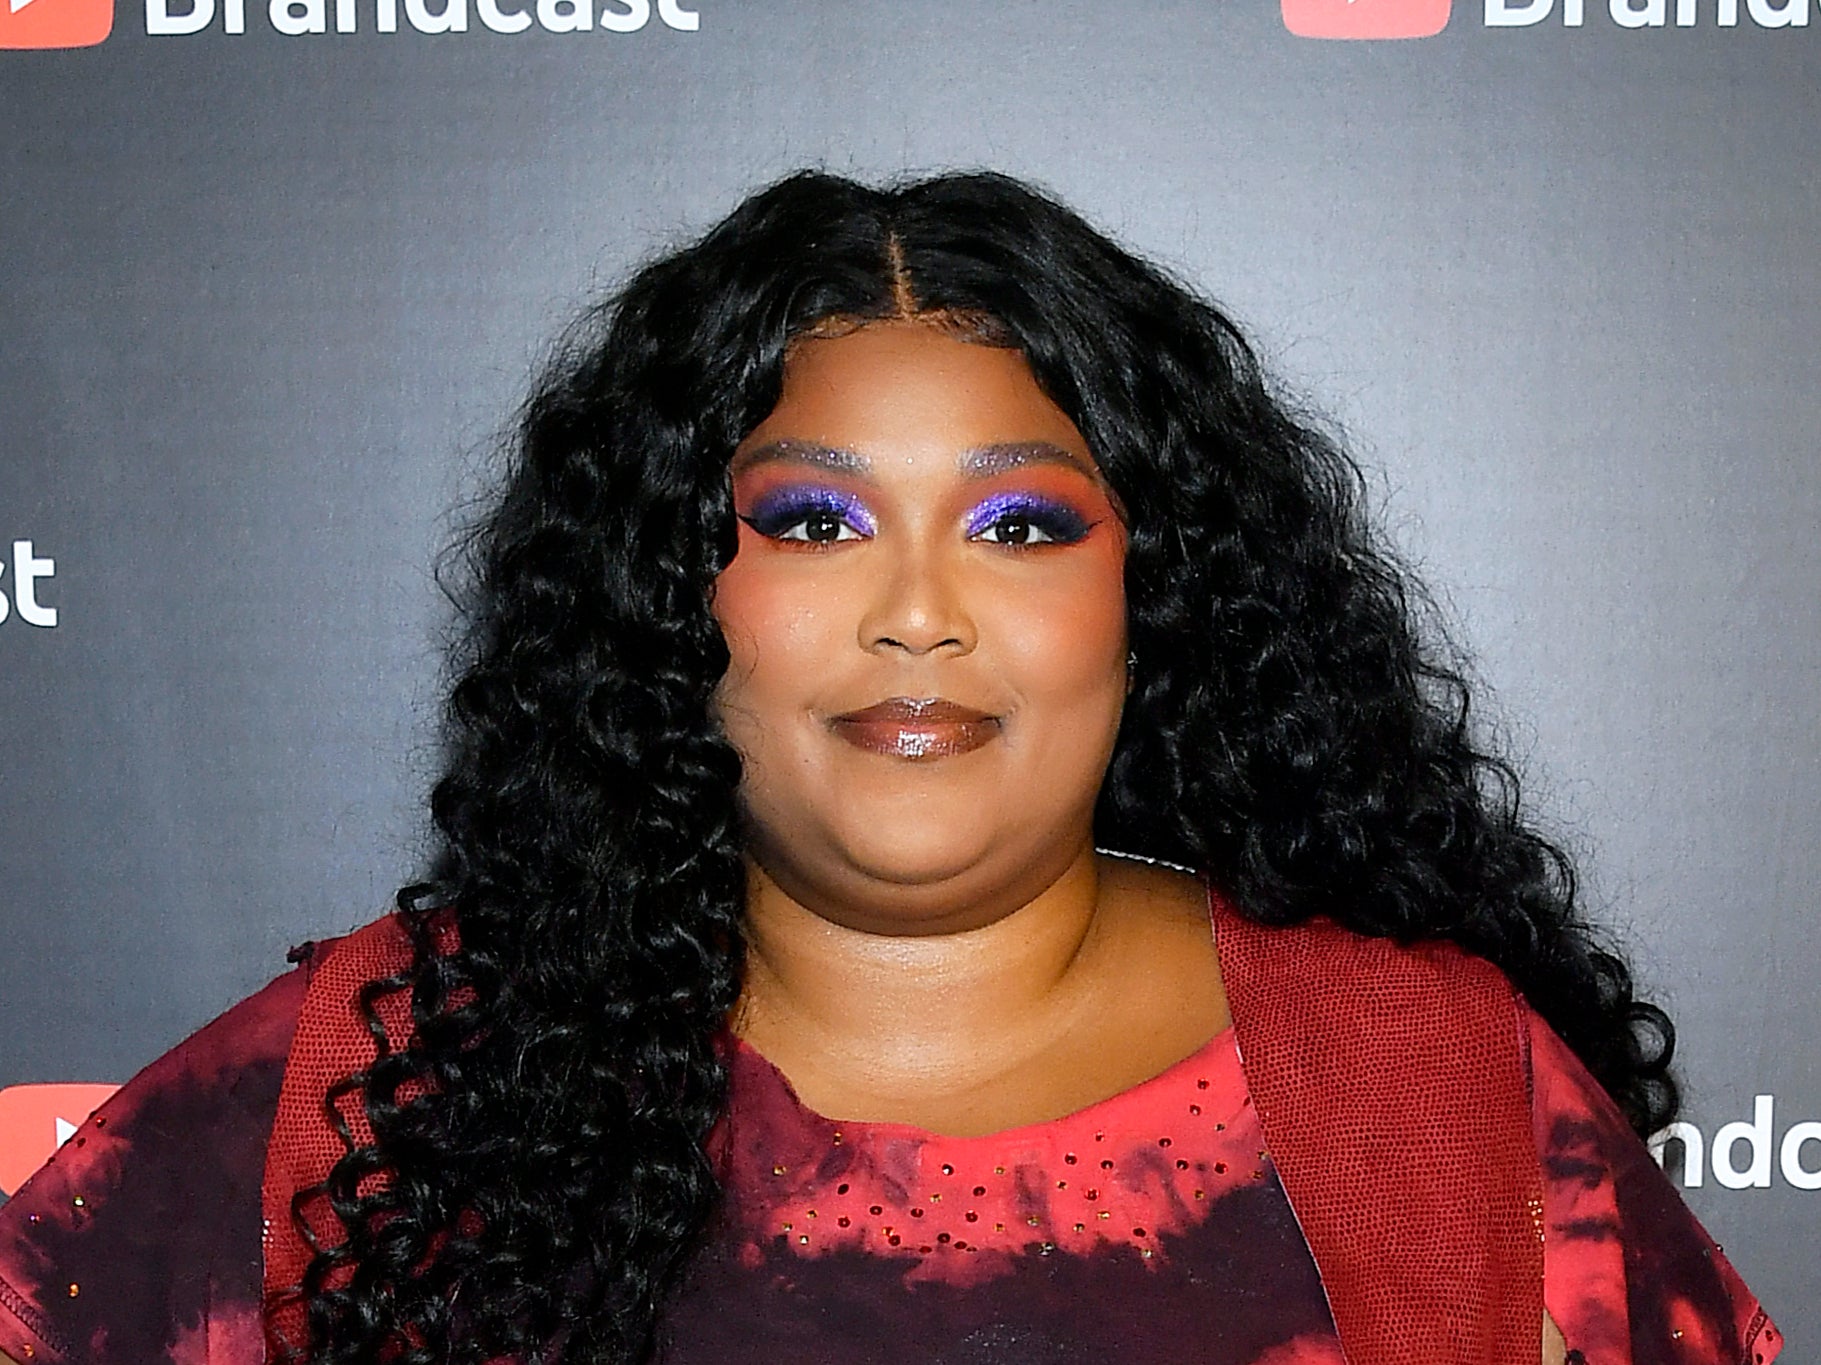 People who look like me could learn a thing or two from Lizzo